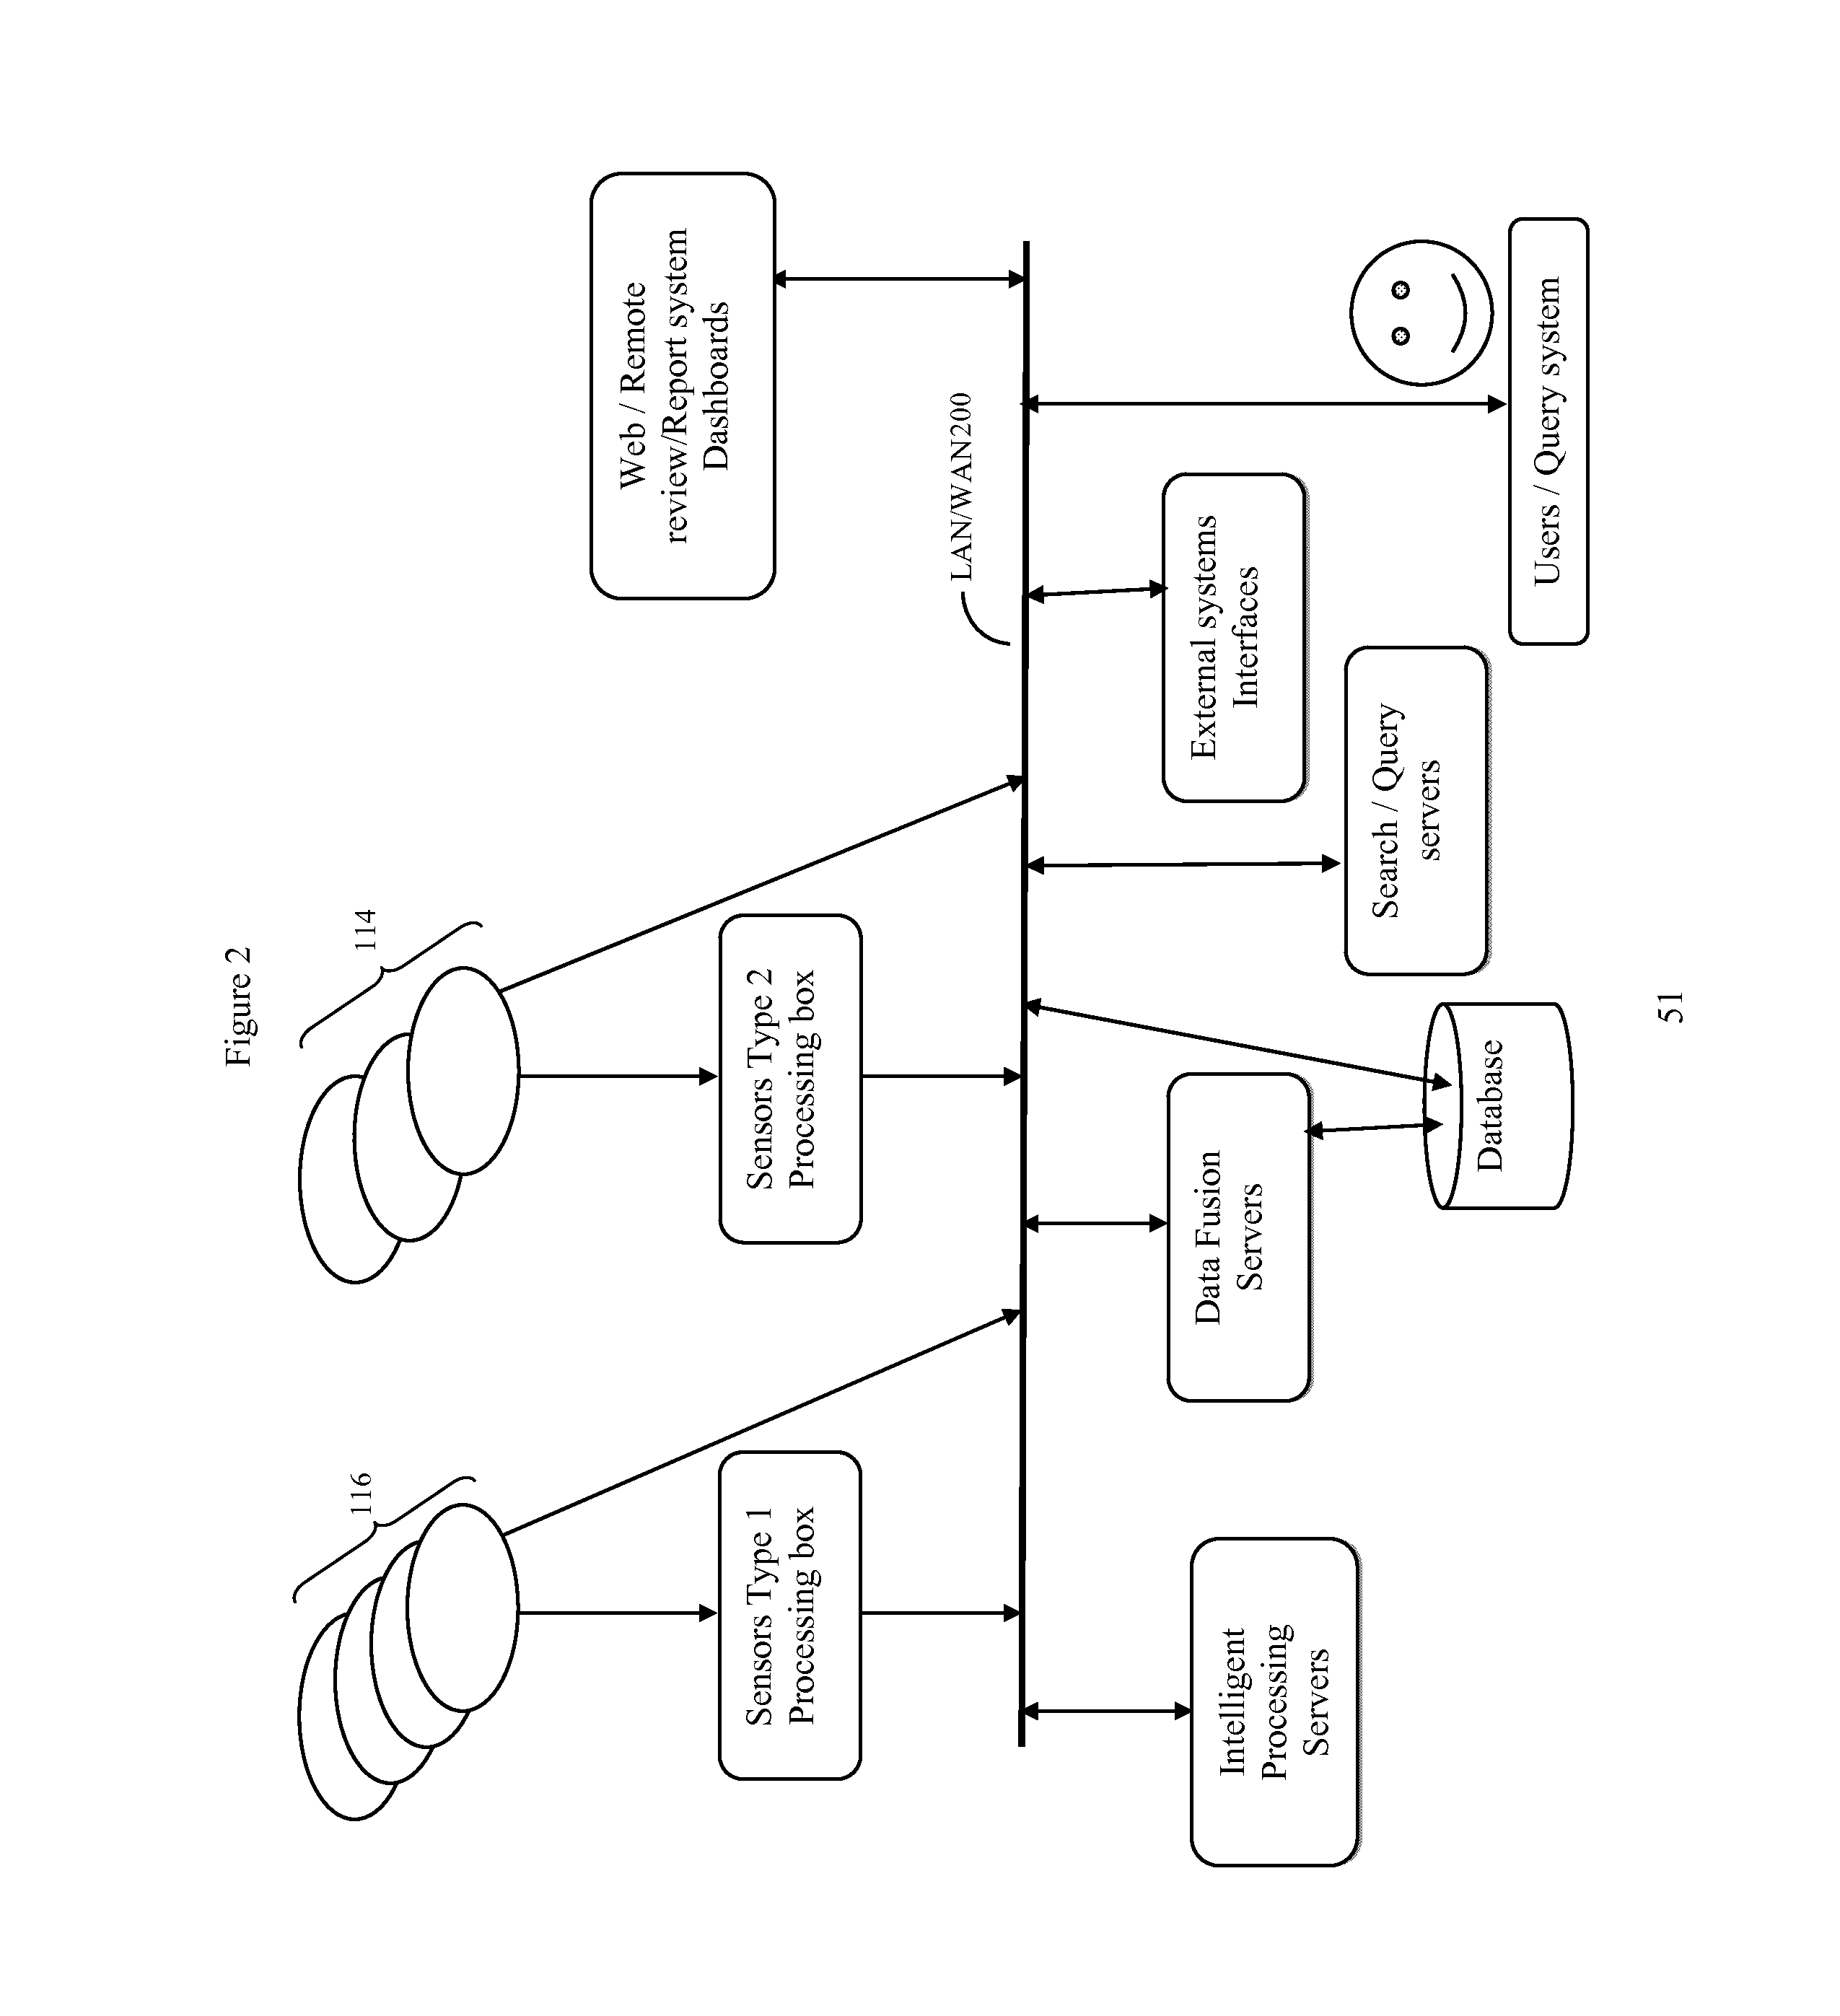 Method of tracking moveable objects by combining data obtained from multiple sensor types